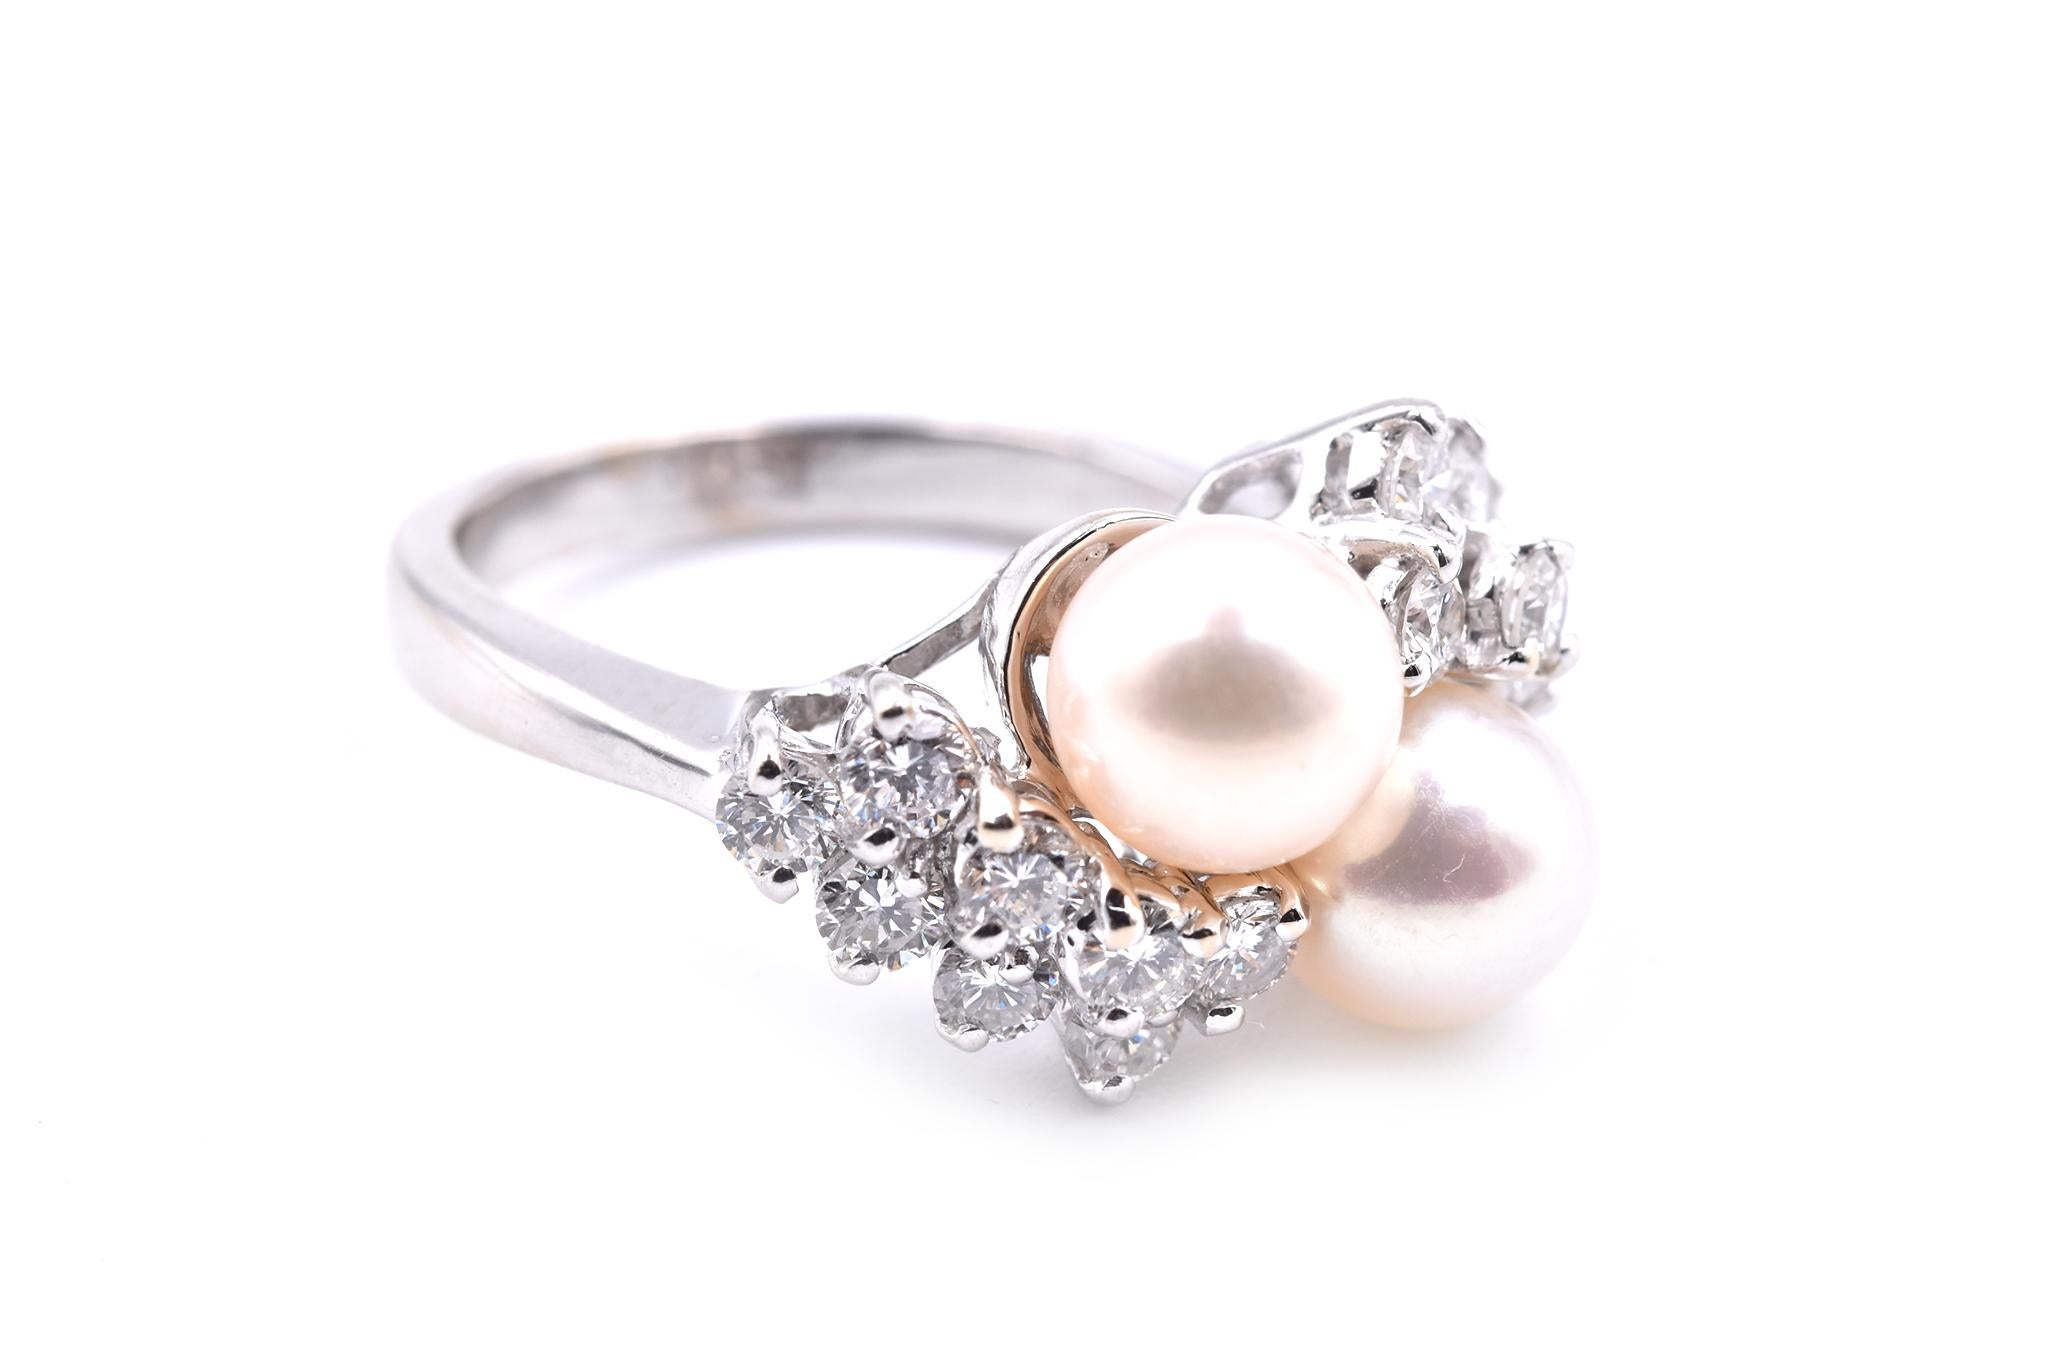 Designer: custom design
Material: 14k white
Cultured Akoya Pearl: 7mm
Diamonds: 16 round brilliant cut = 1.00cttw
Color: G
Clarity: VS
Ring Size: 7 ½ (please allow two additional shipping days for sizing requests)
Dimensions: ring top is 12.16mm by